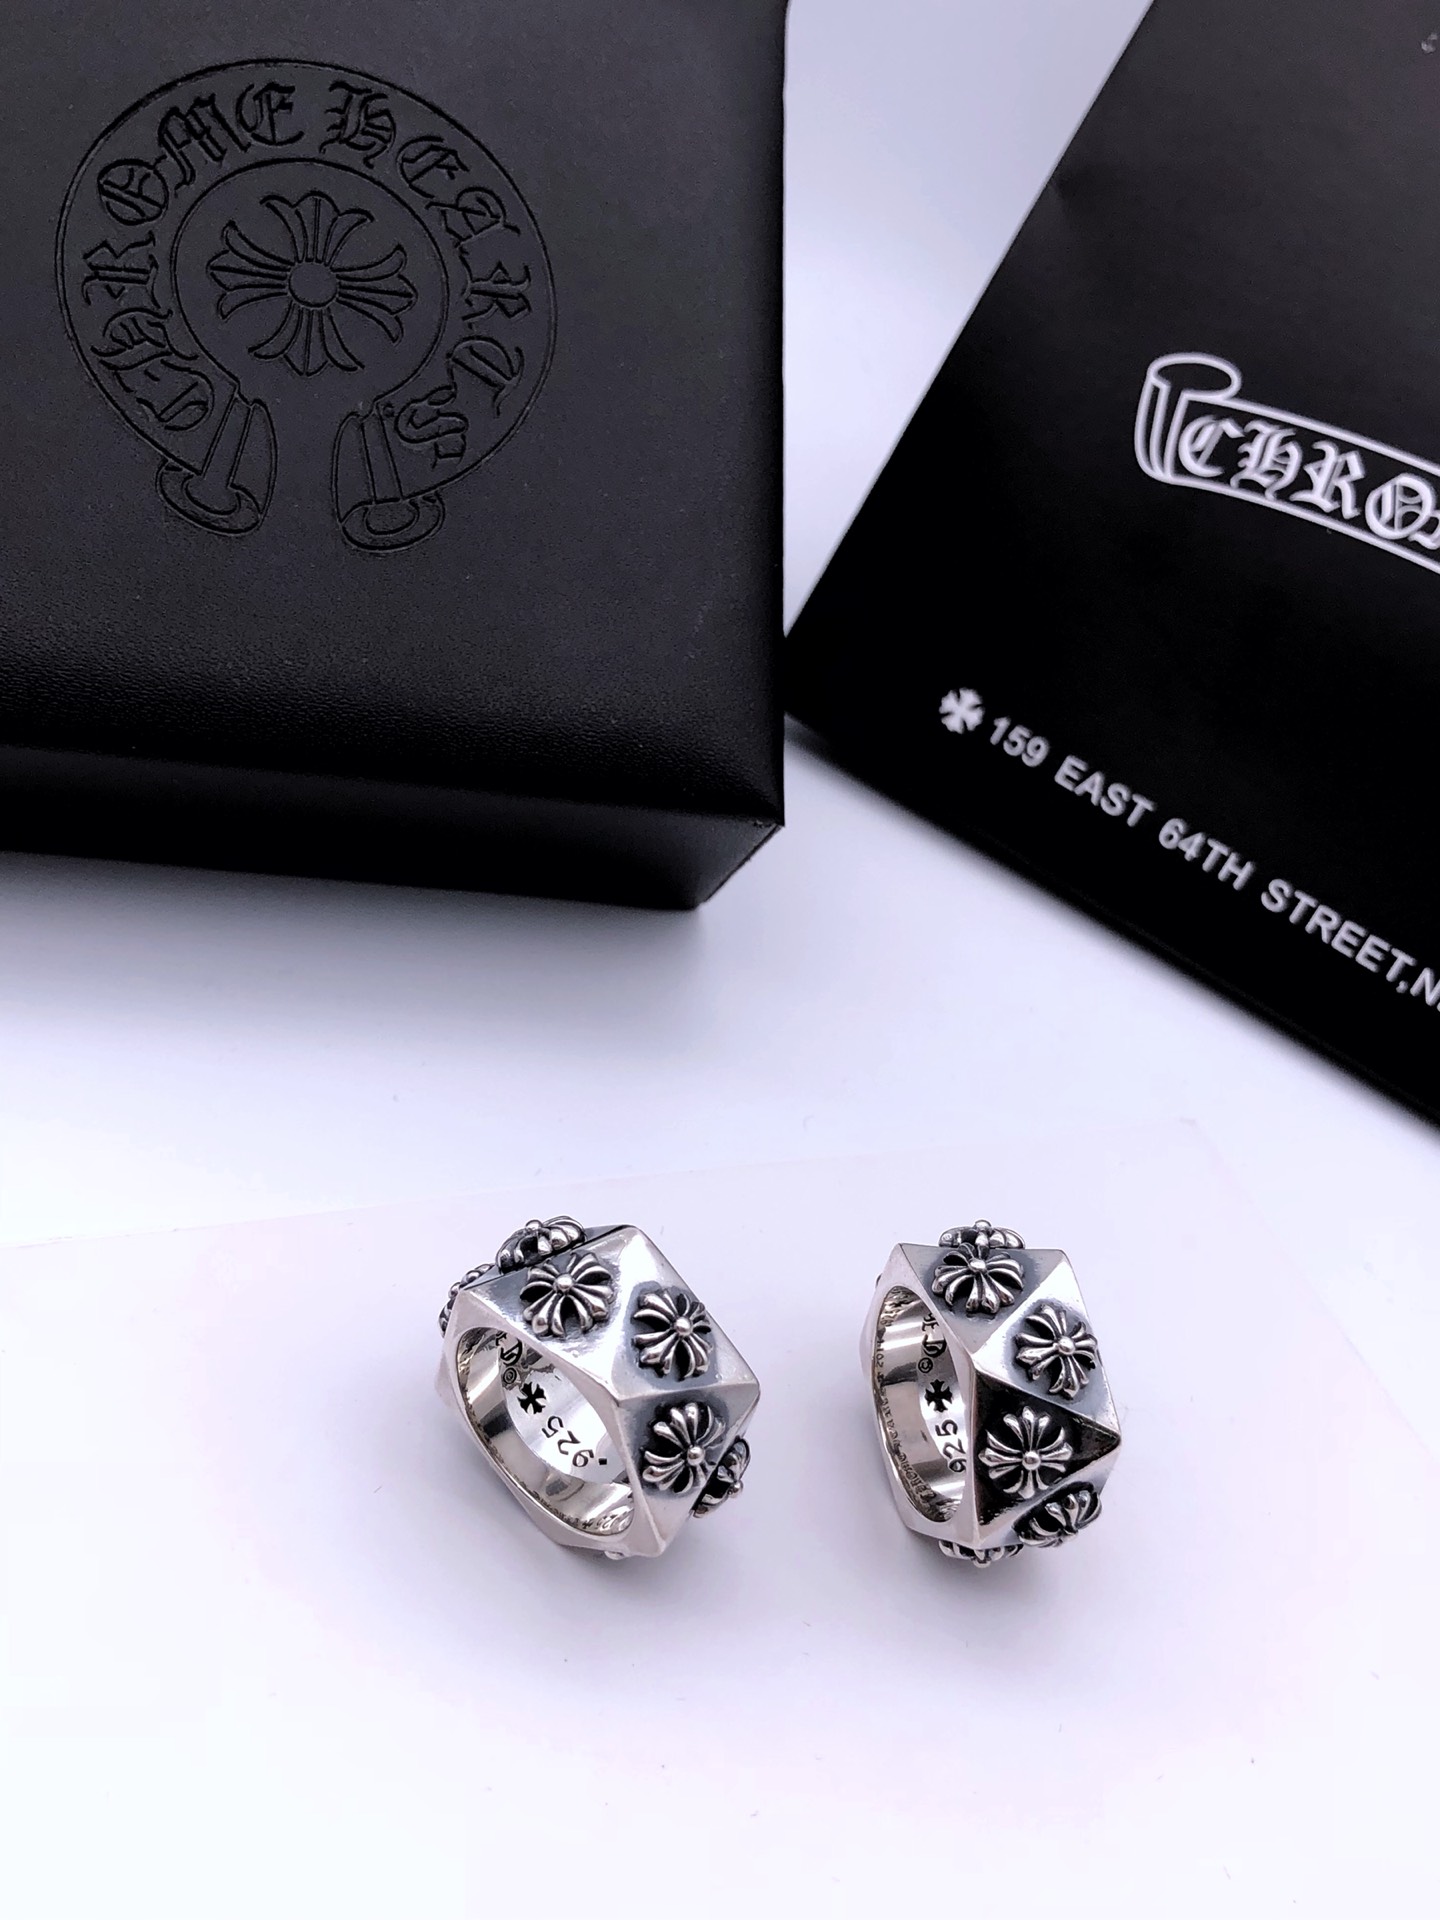 Chrome Hearts Jewelry Ring- 925 Silver